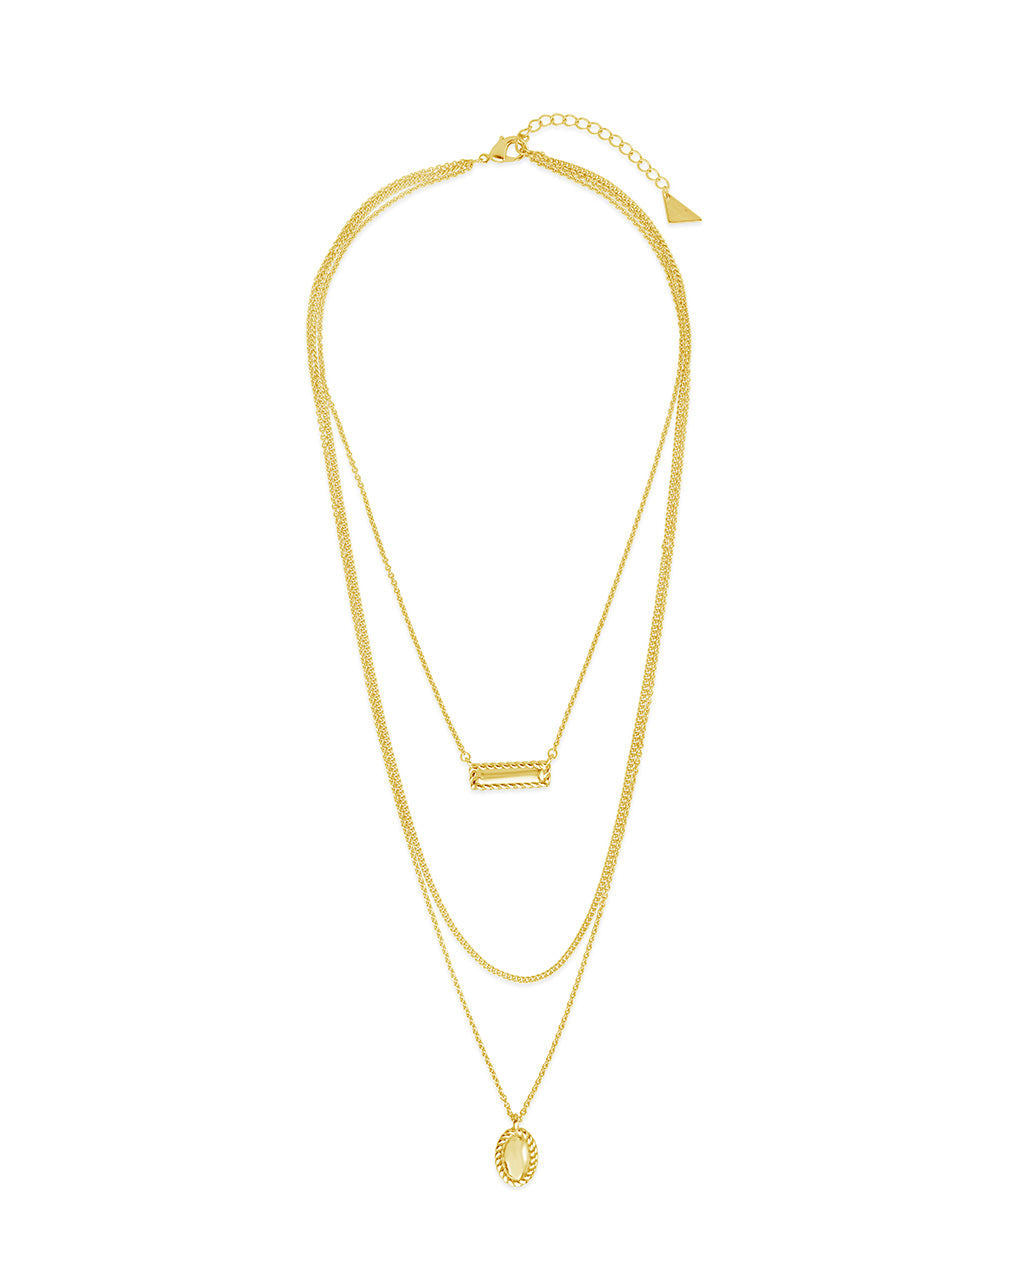 Hartley Polished Layered Chain Necklace